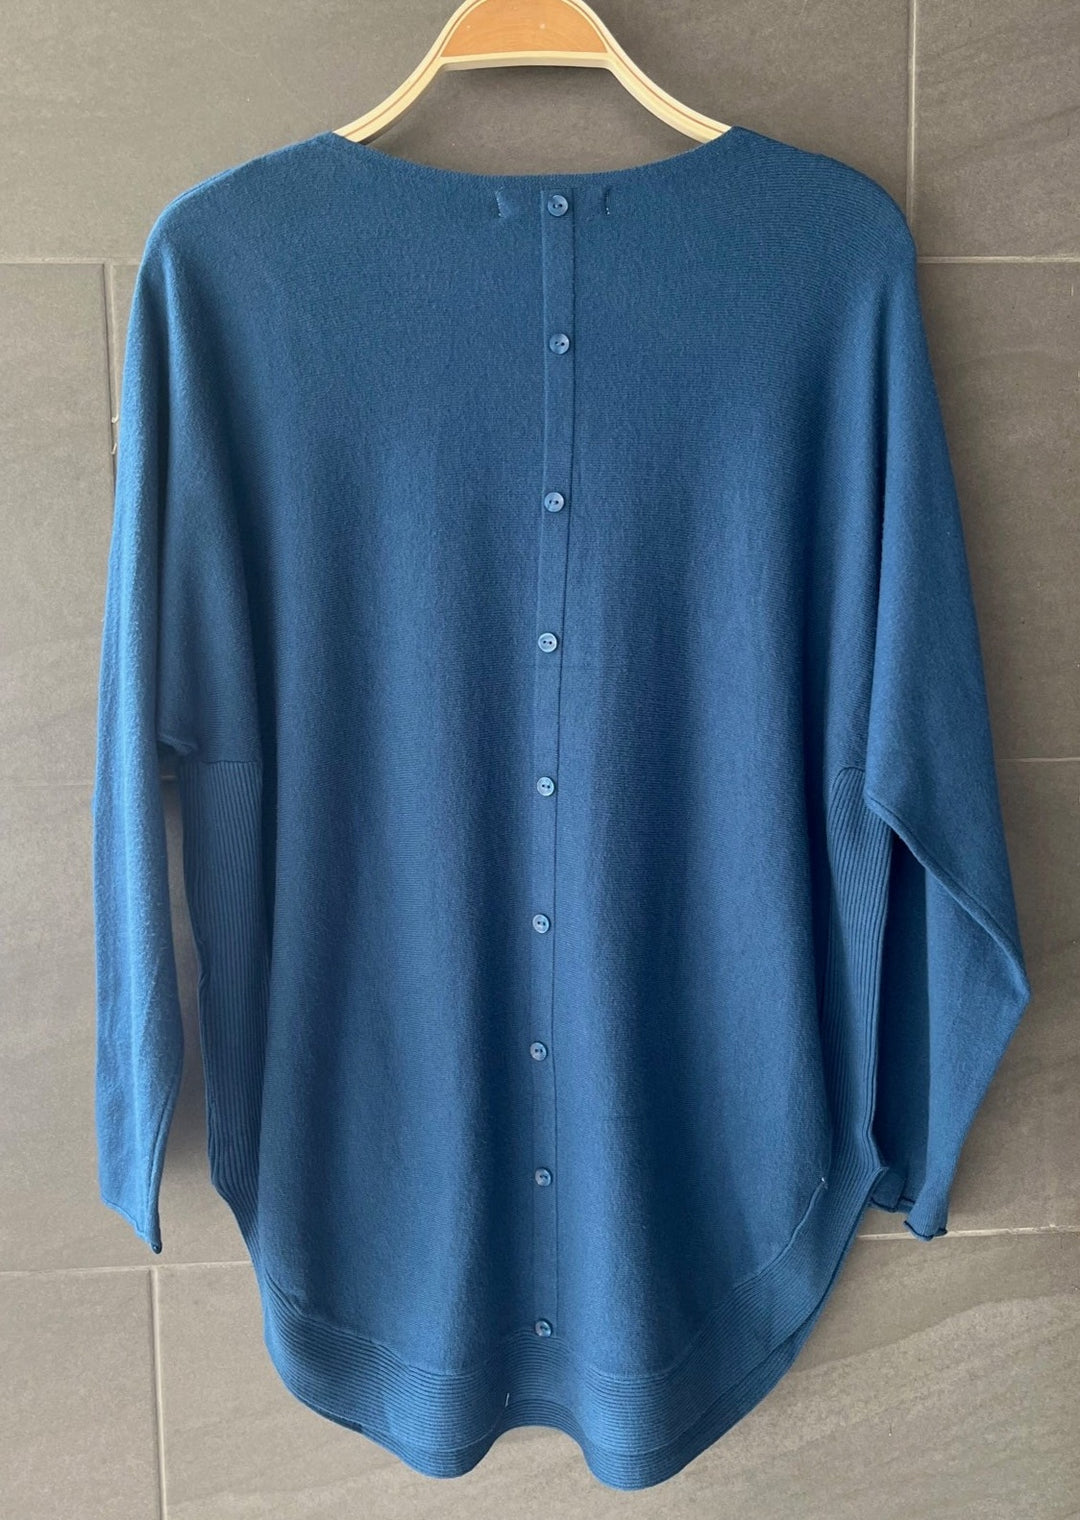 Meo Oversized Button Sweater (Dark Teal)